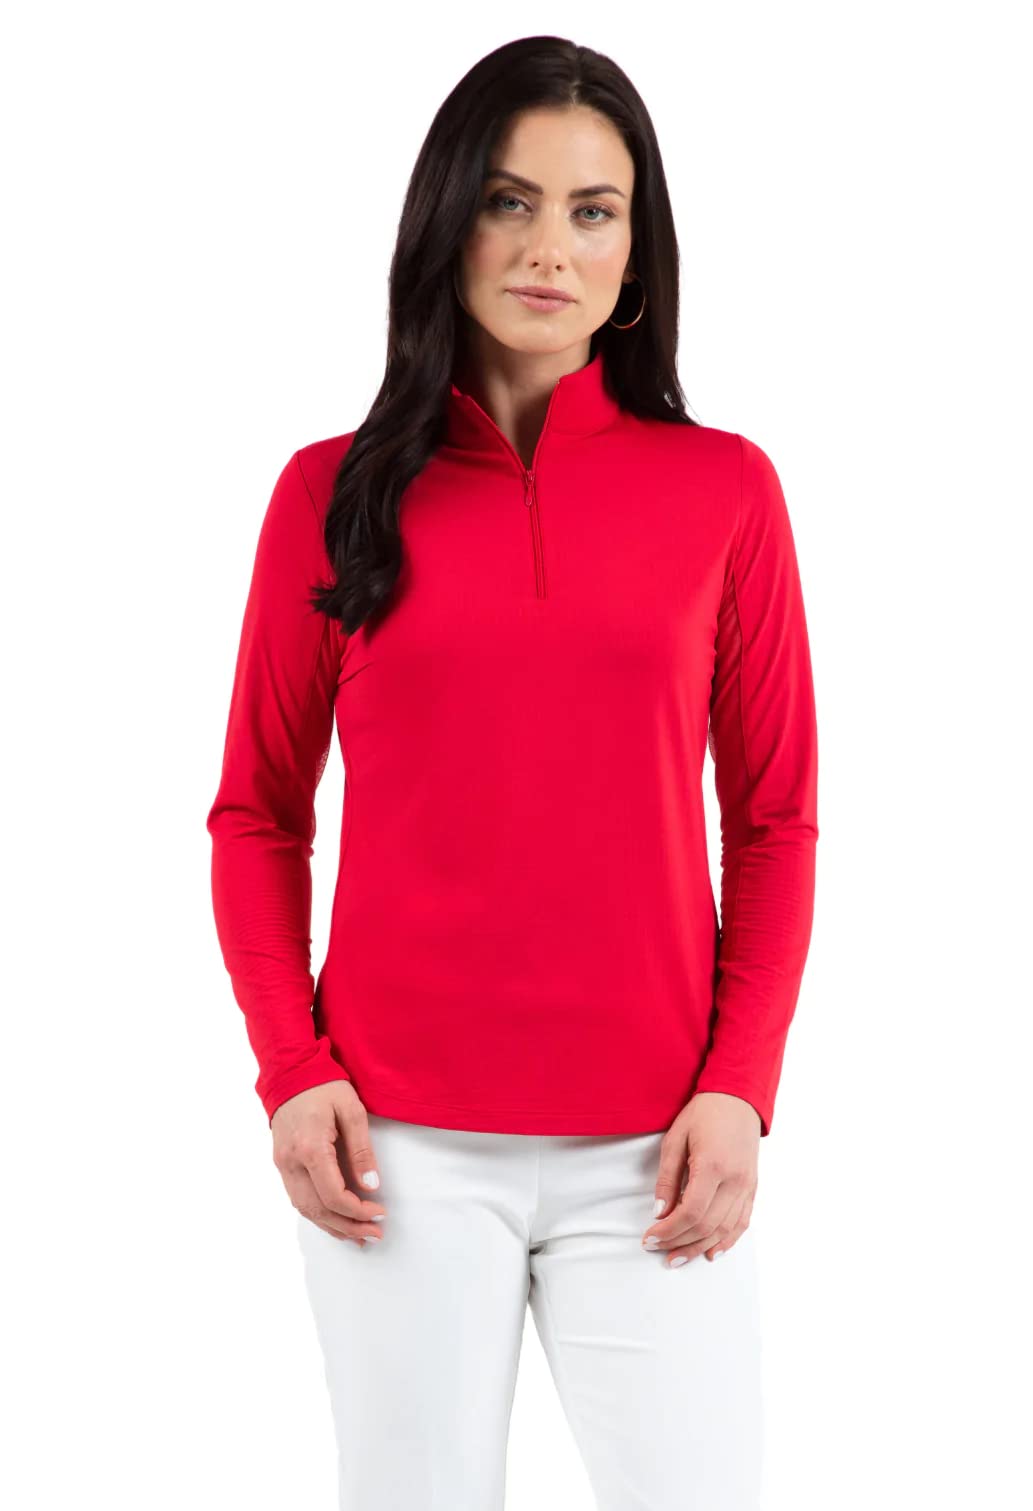 IBKUL Athleisure Wear Sun Protective UPF 50+ Icefil Cooling Tech Long Sleeve Mock Neck Top with Under Arm Mesh 80000 Red Solid XXL